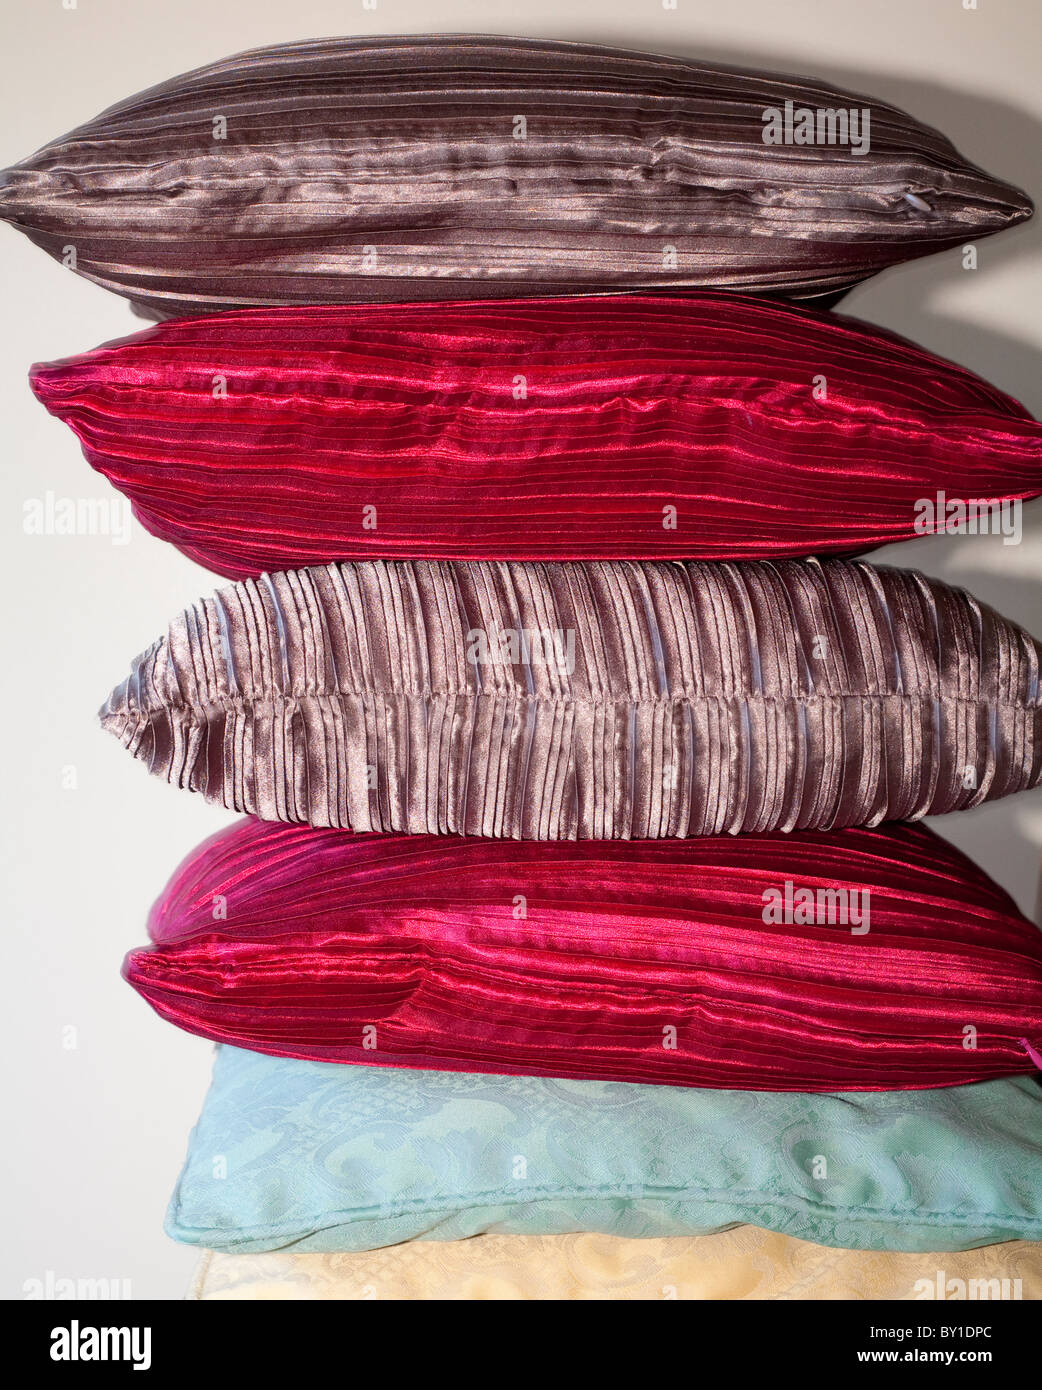 Pile of cushions Stock Photo